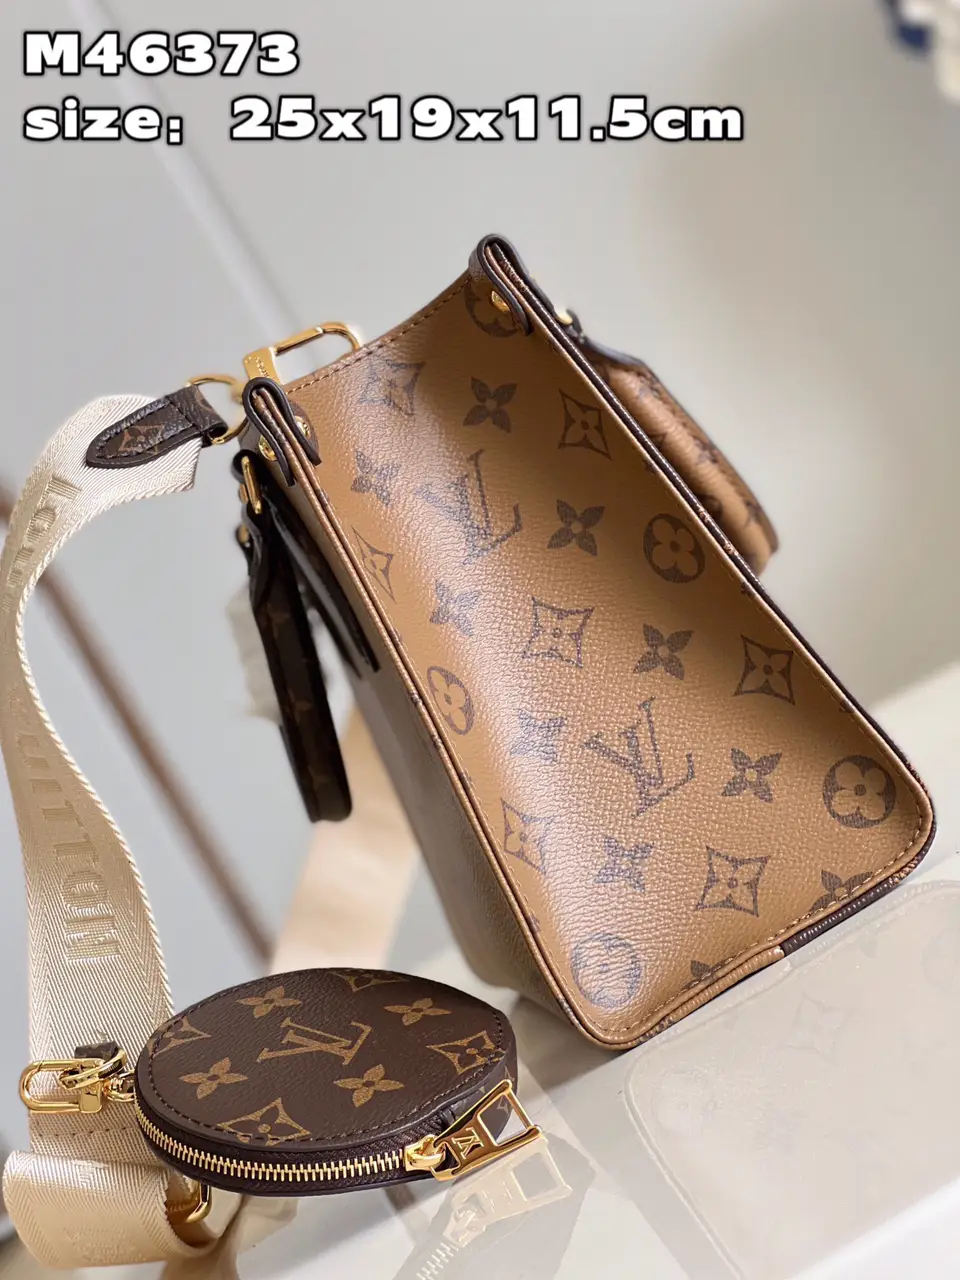 Lv on the go handbag Real shot detail map✨✨✨, Gallery posted by Vivian💗💗💗